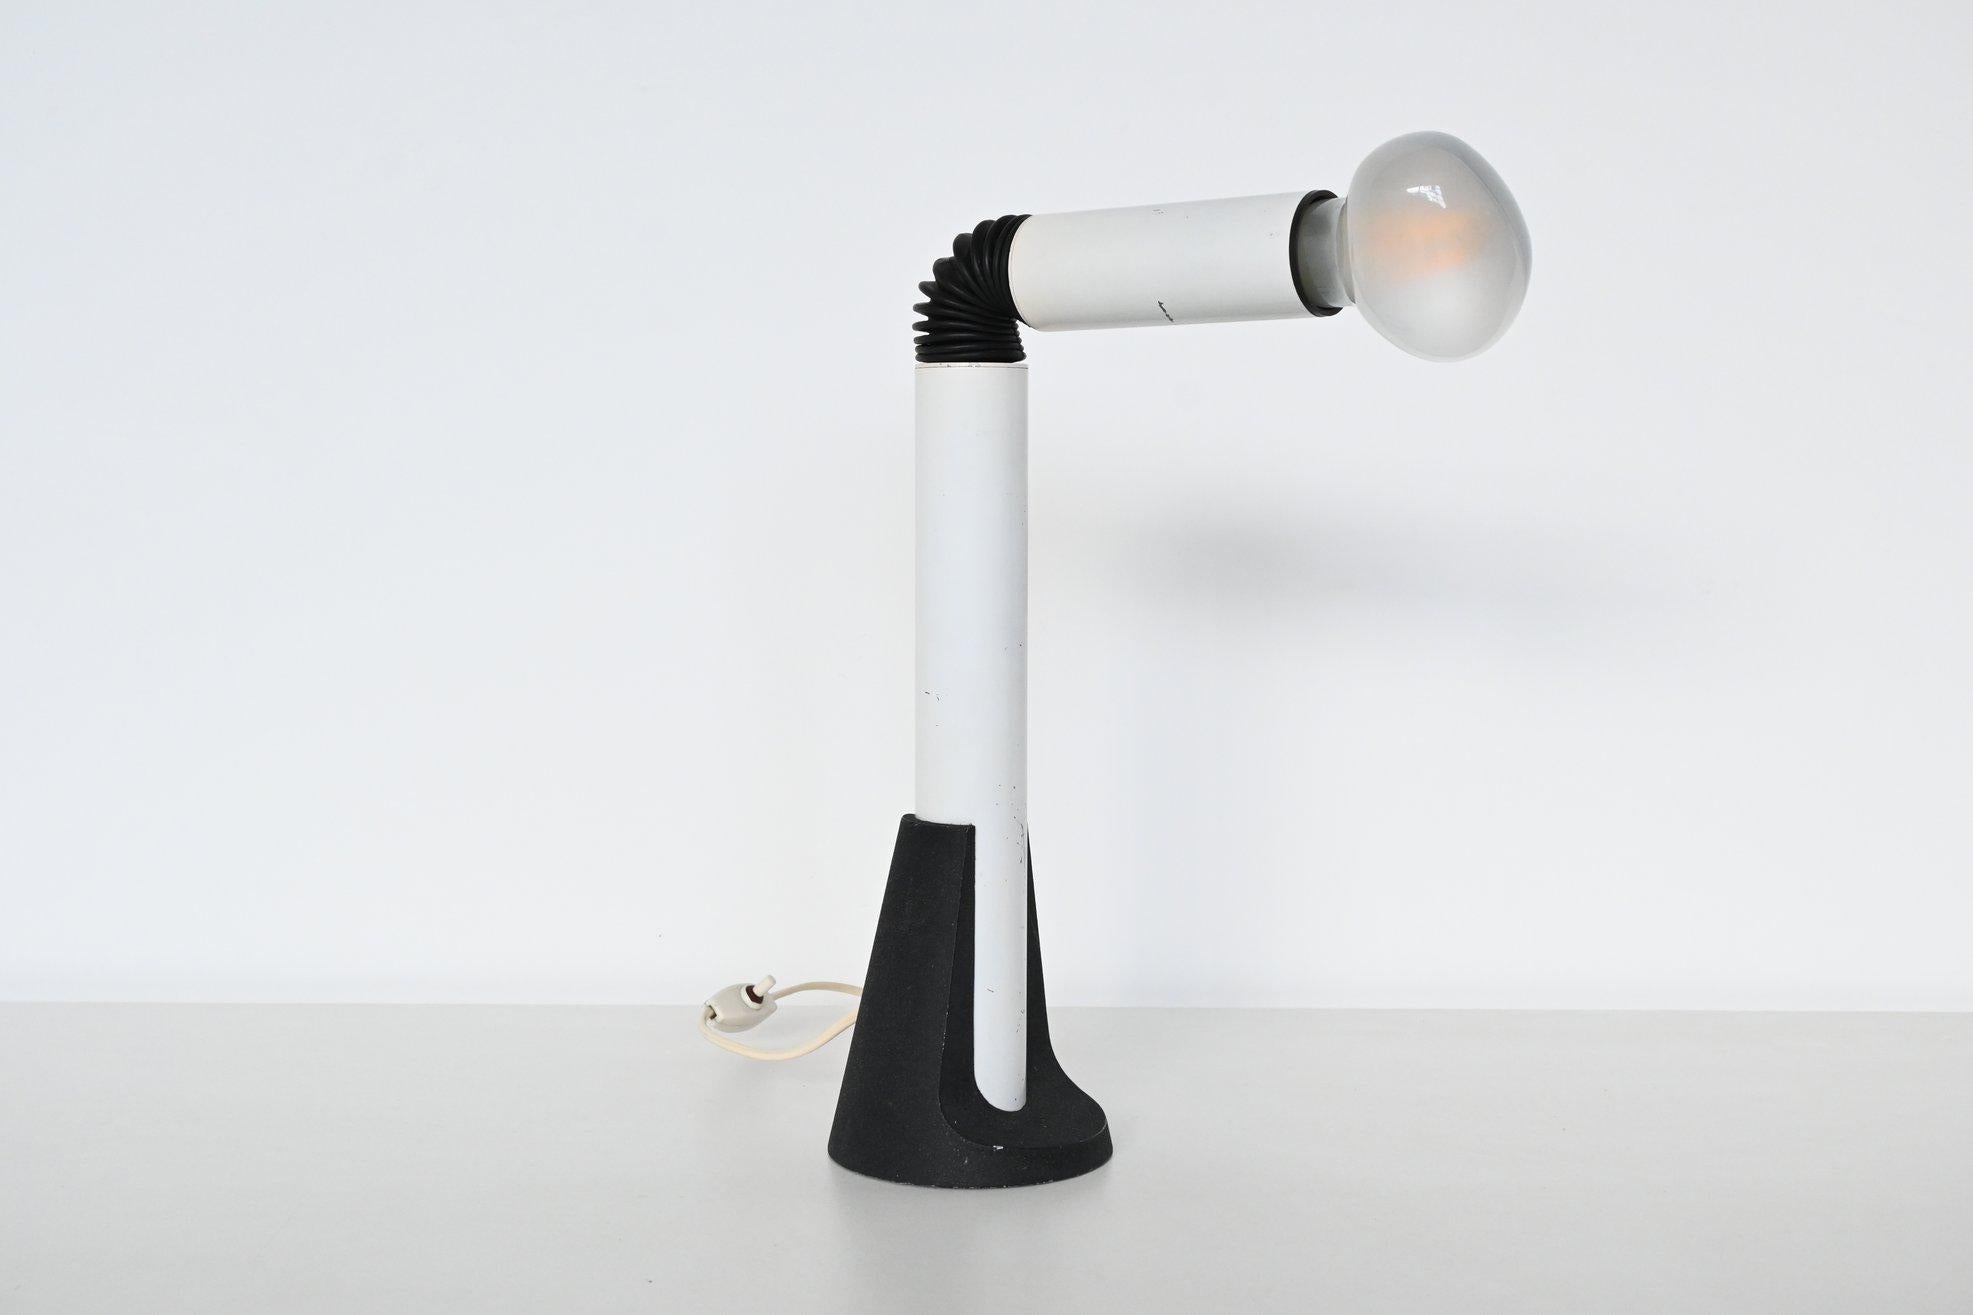 Very nice Periscopio table lamp designed by Danilo Aroldi & Corrado Aroldi and manufactured by Stilnovo, Italy 1967. The lamp has two white lacquered aluminium tubes connected with a rubber flexible joint supported by a round cast iron base. Because